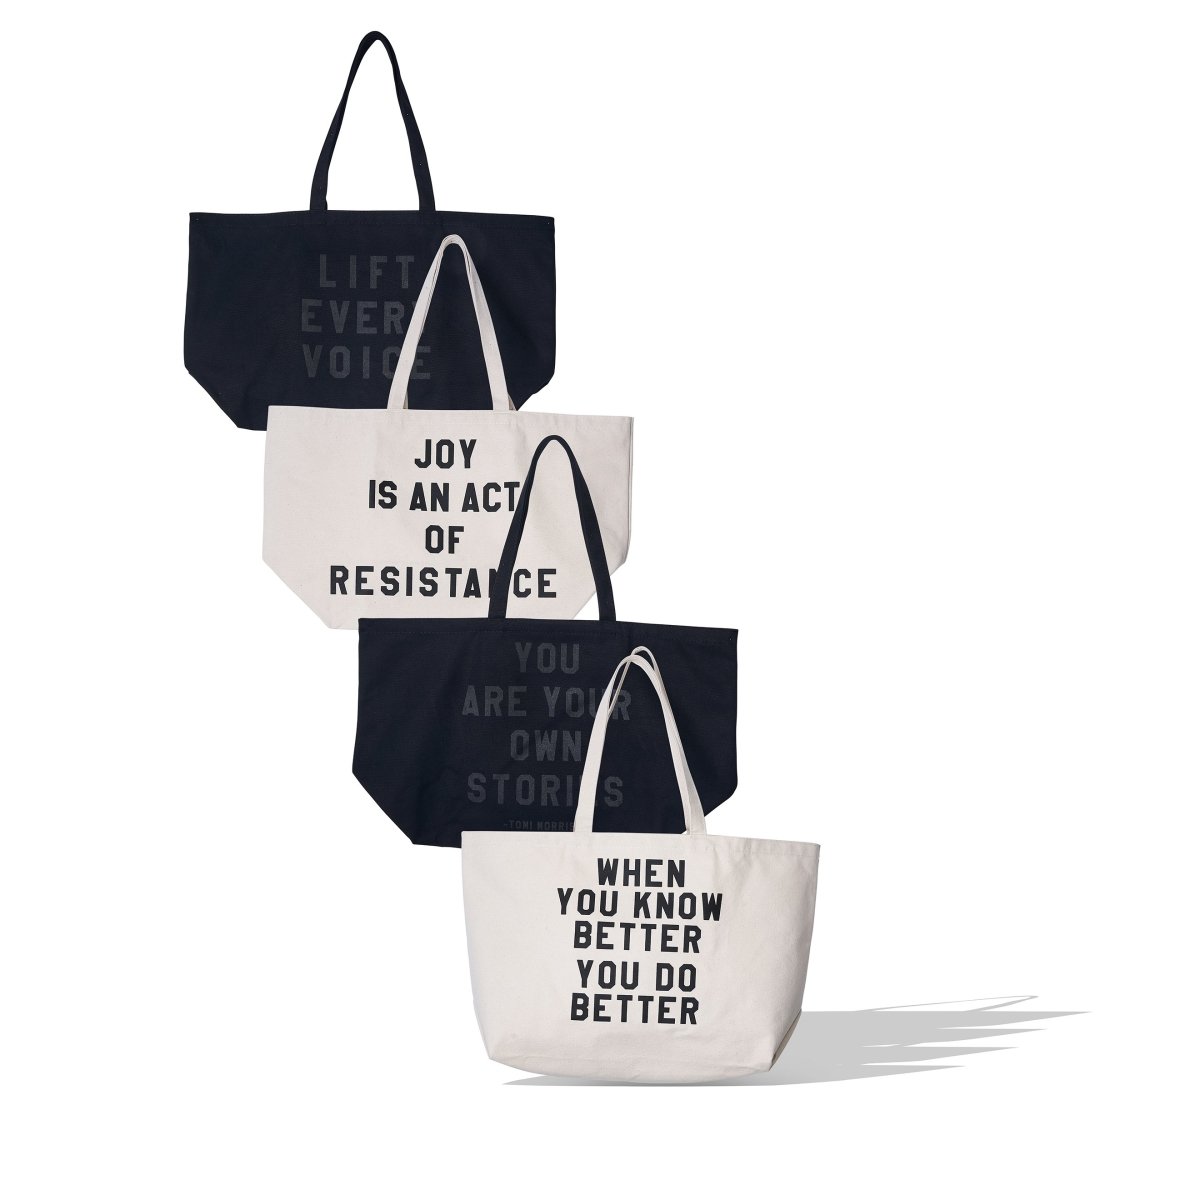 Replying to @user71658376628 the perfect tote bag to exist